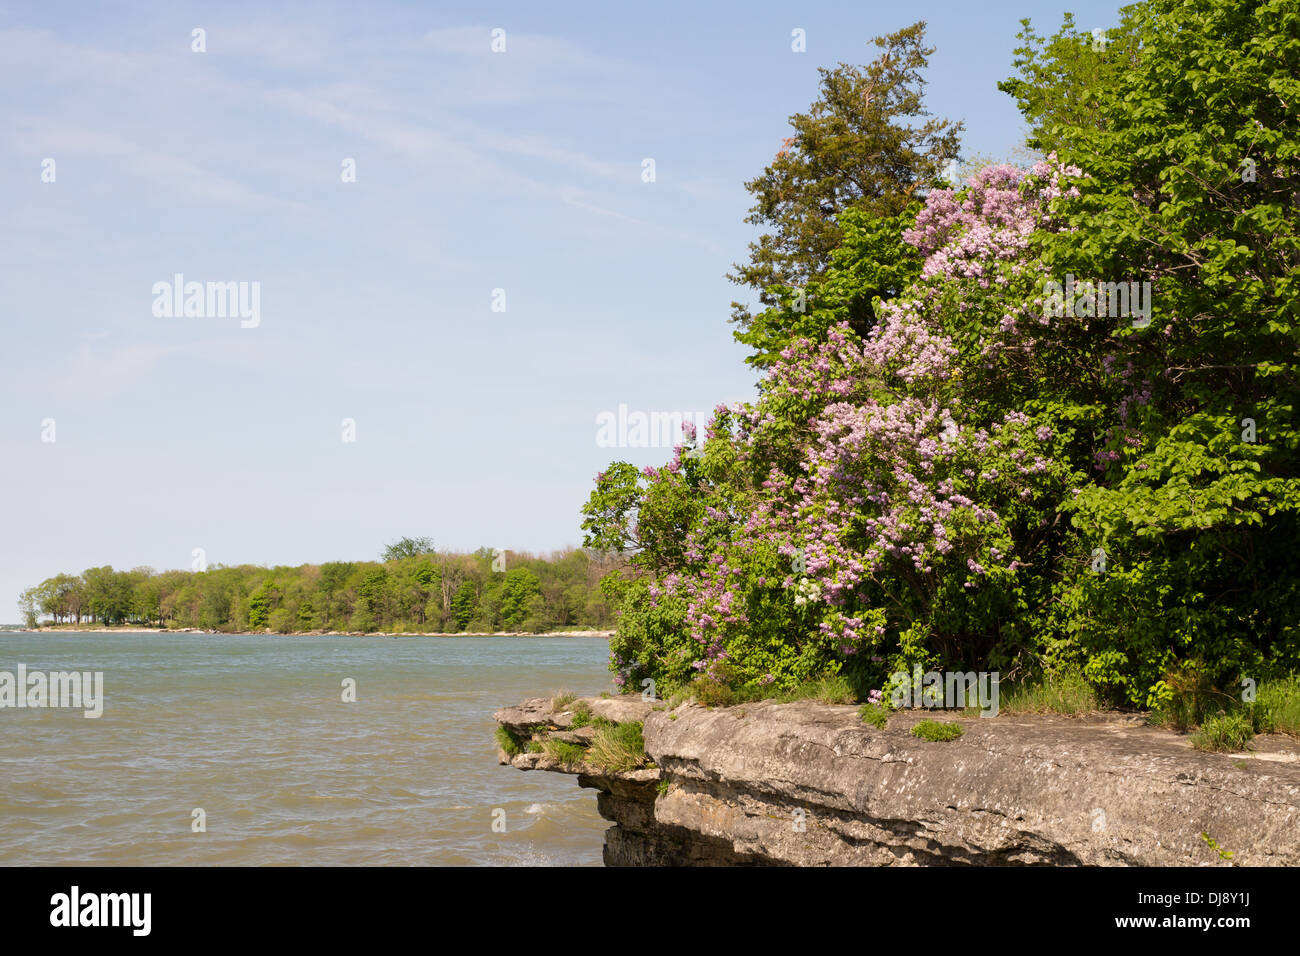 Lilacs and other bushes grow on a rocky outcrop on Kelleys Island over looking Lake Erie. Stock Photo